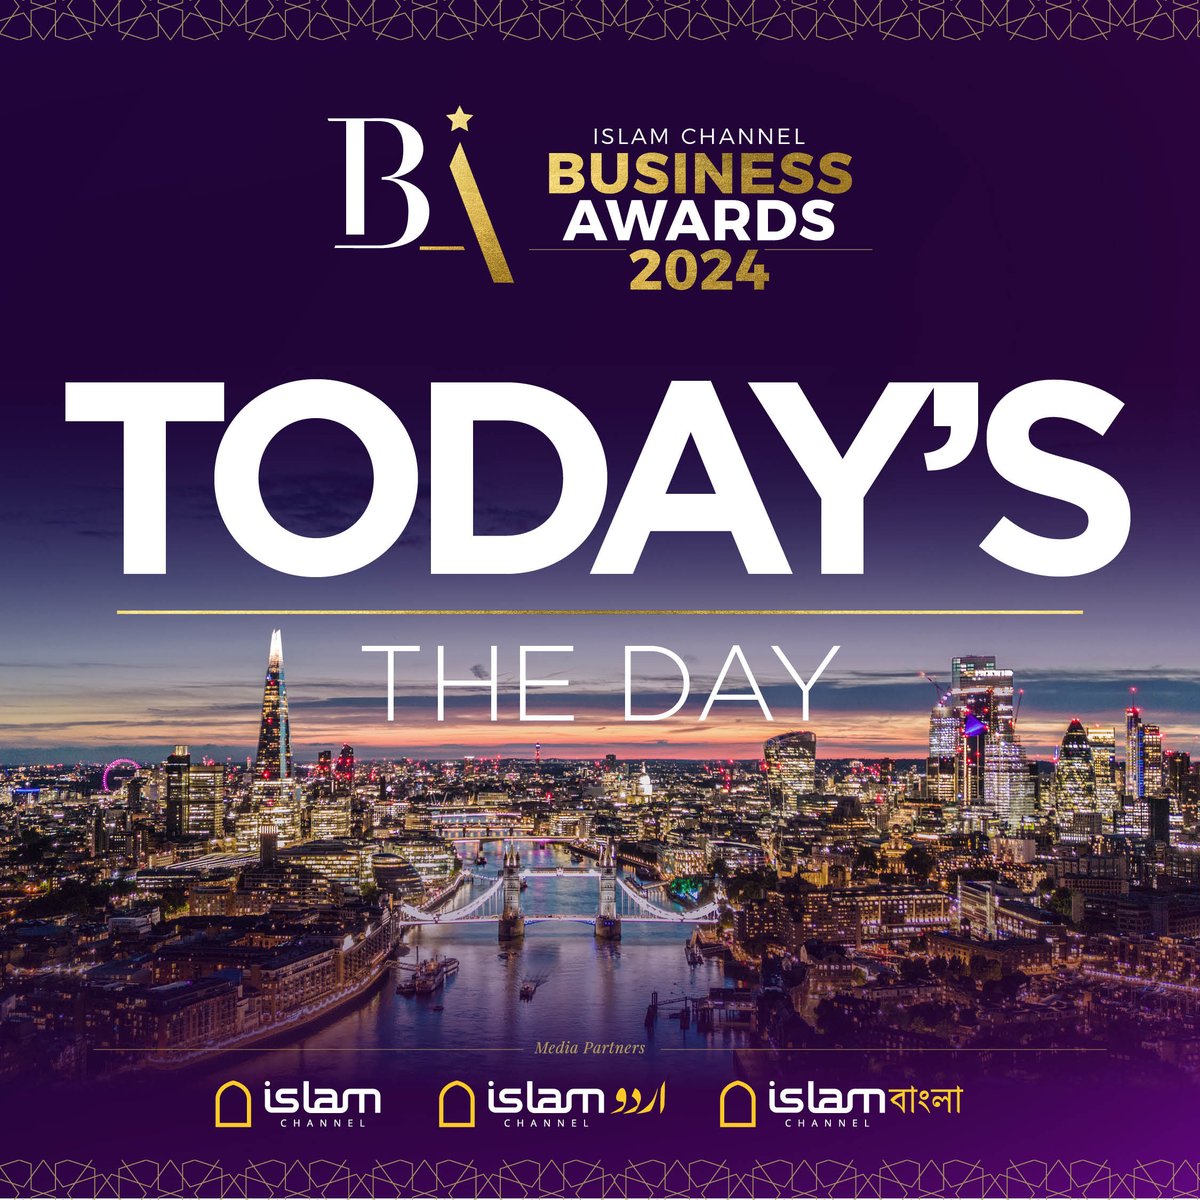 It's finally here! Watch this space for our coverage of the Islam Channel Business Awards 2024.
 
For those who can't make it tonight, the show is live on Islam Channel on television and on our web and apps.
 
#islamchannel #icba24 #businessawards #london #britishmuslims